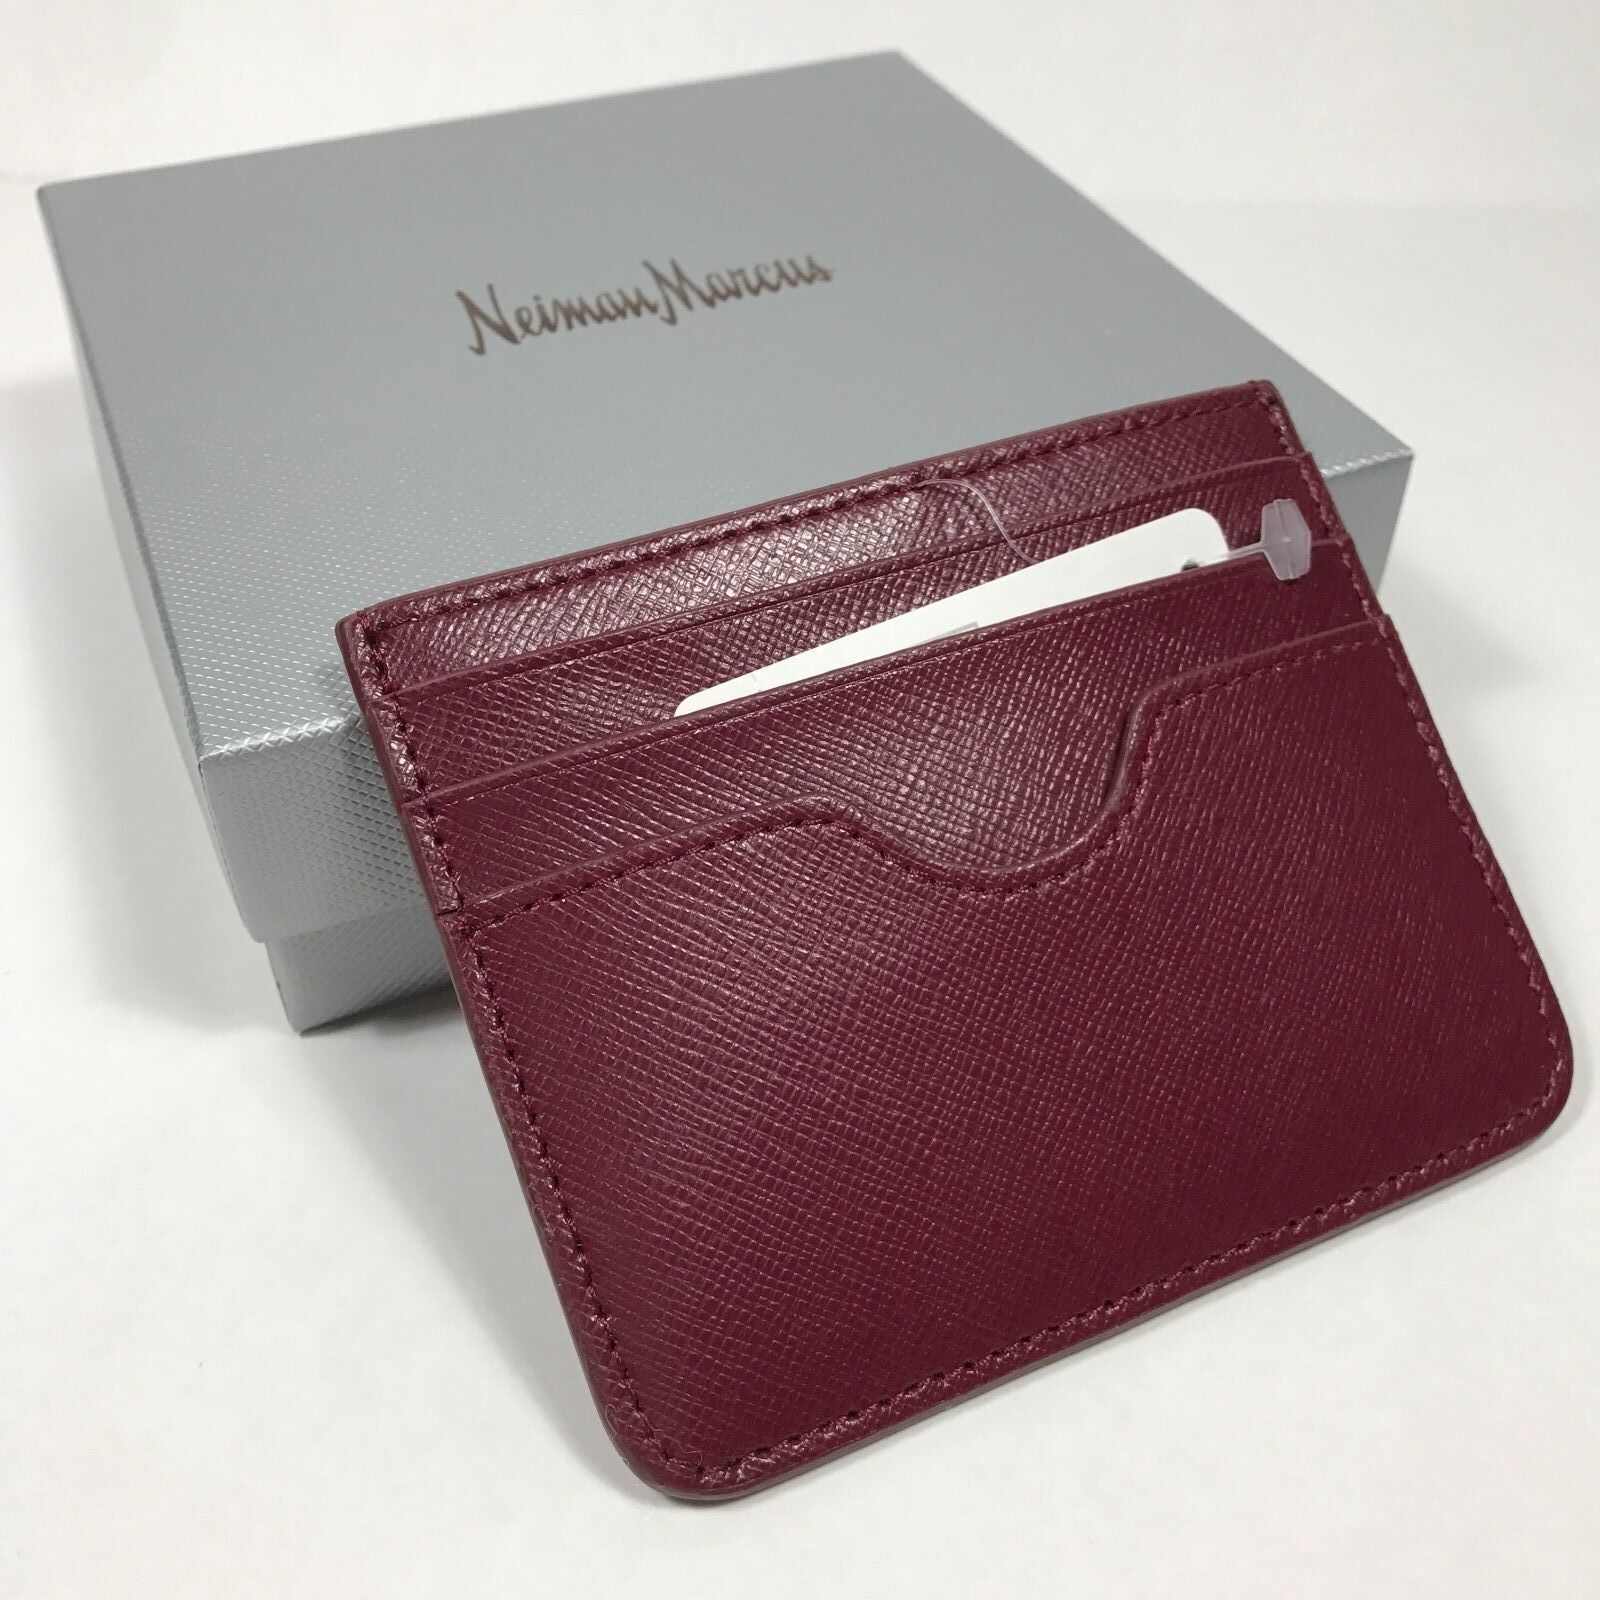 Neiman Marcus Crosshatched Leather Slim Card Case/Wallet.Red Wine - $26.18